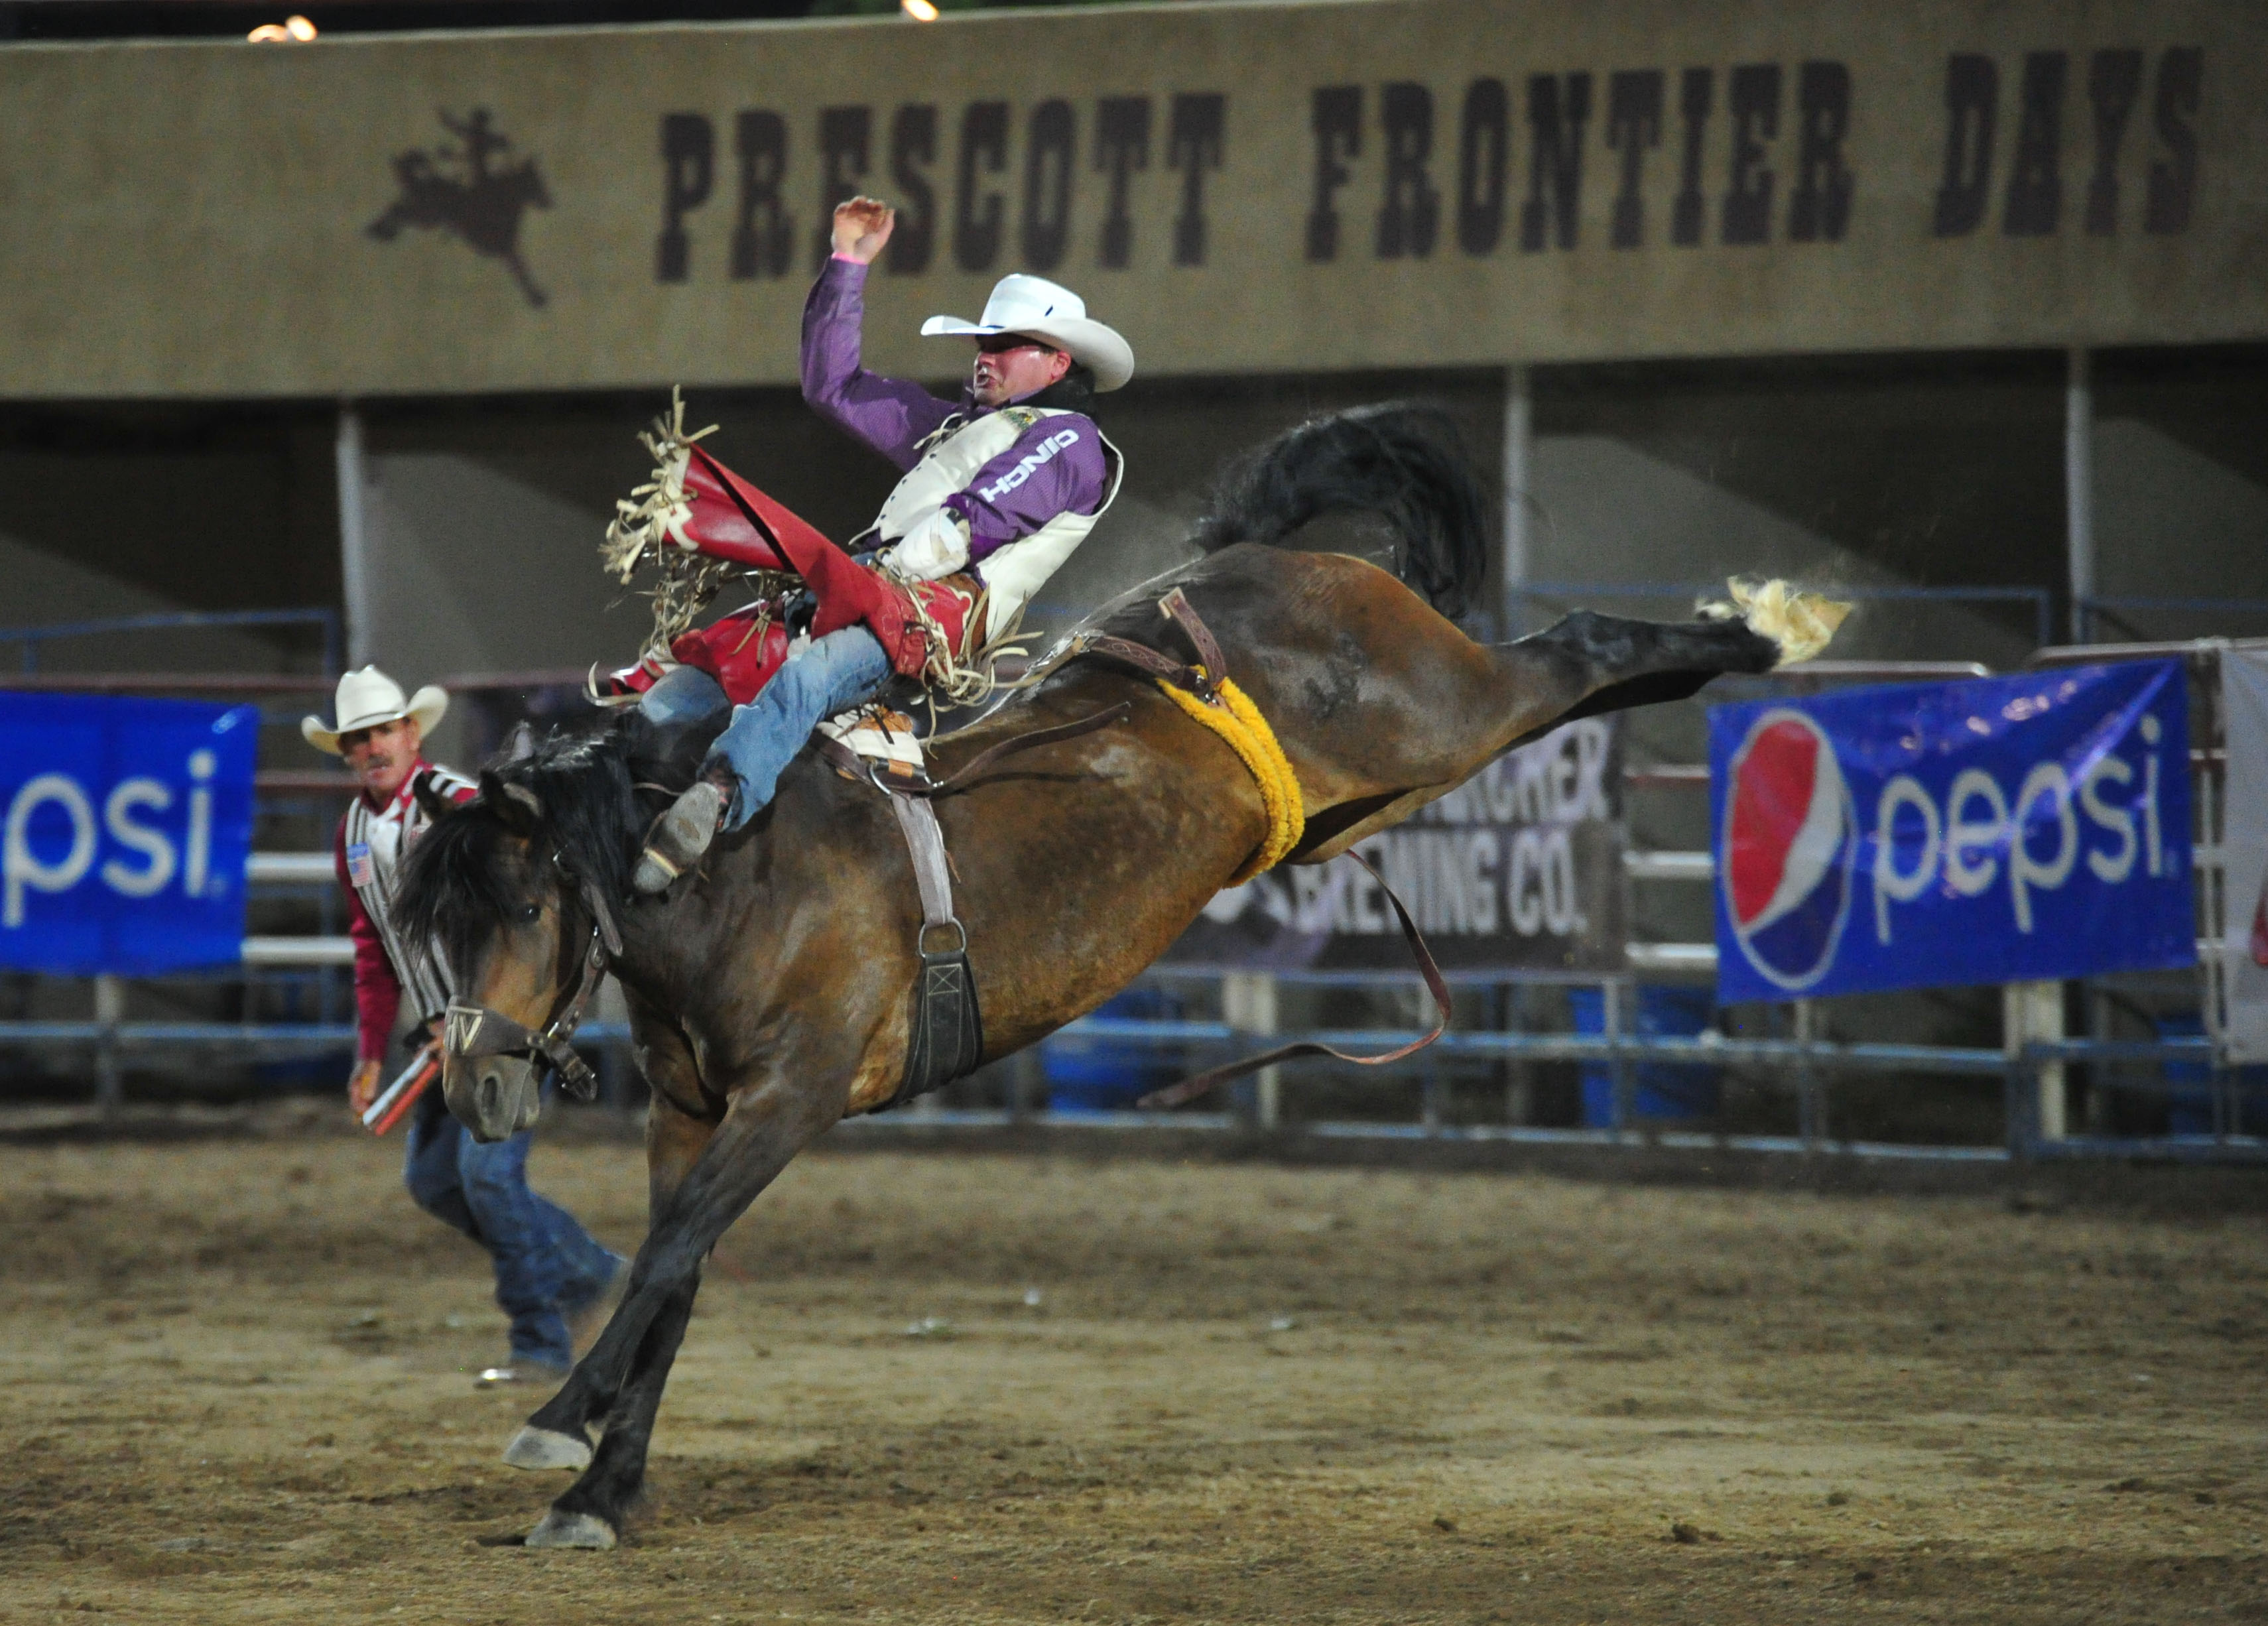 Prescott Frontier Days Rodeo Photo Gallery The Daily Courier